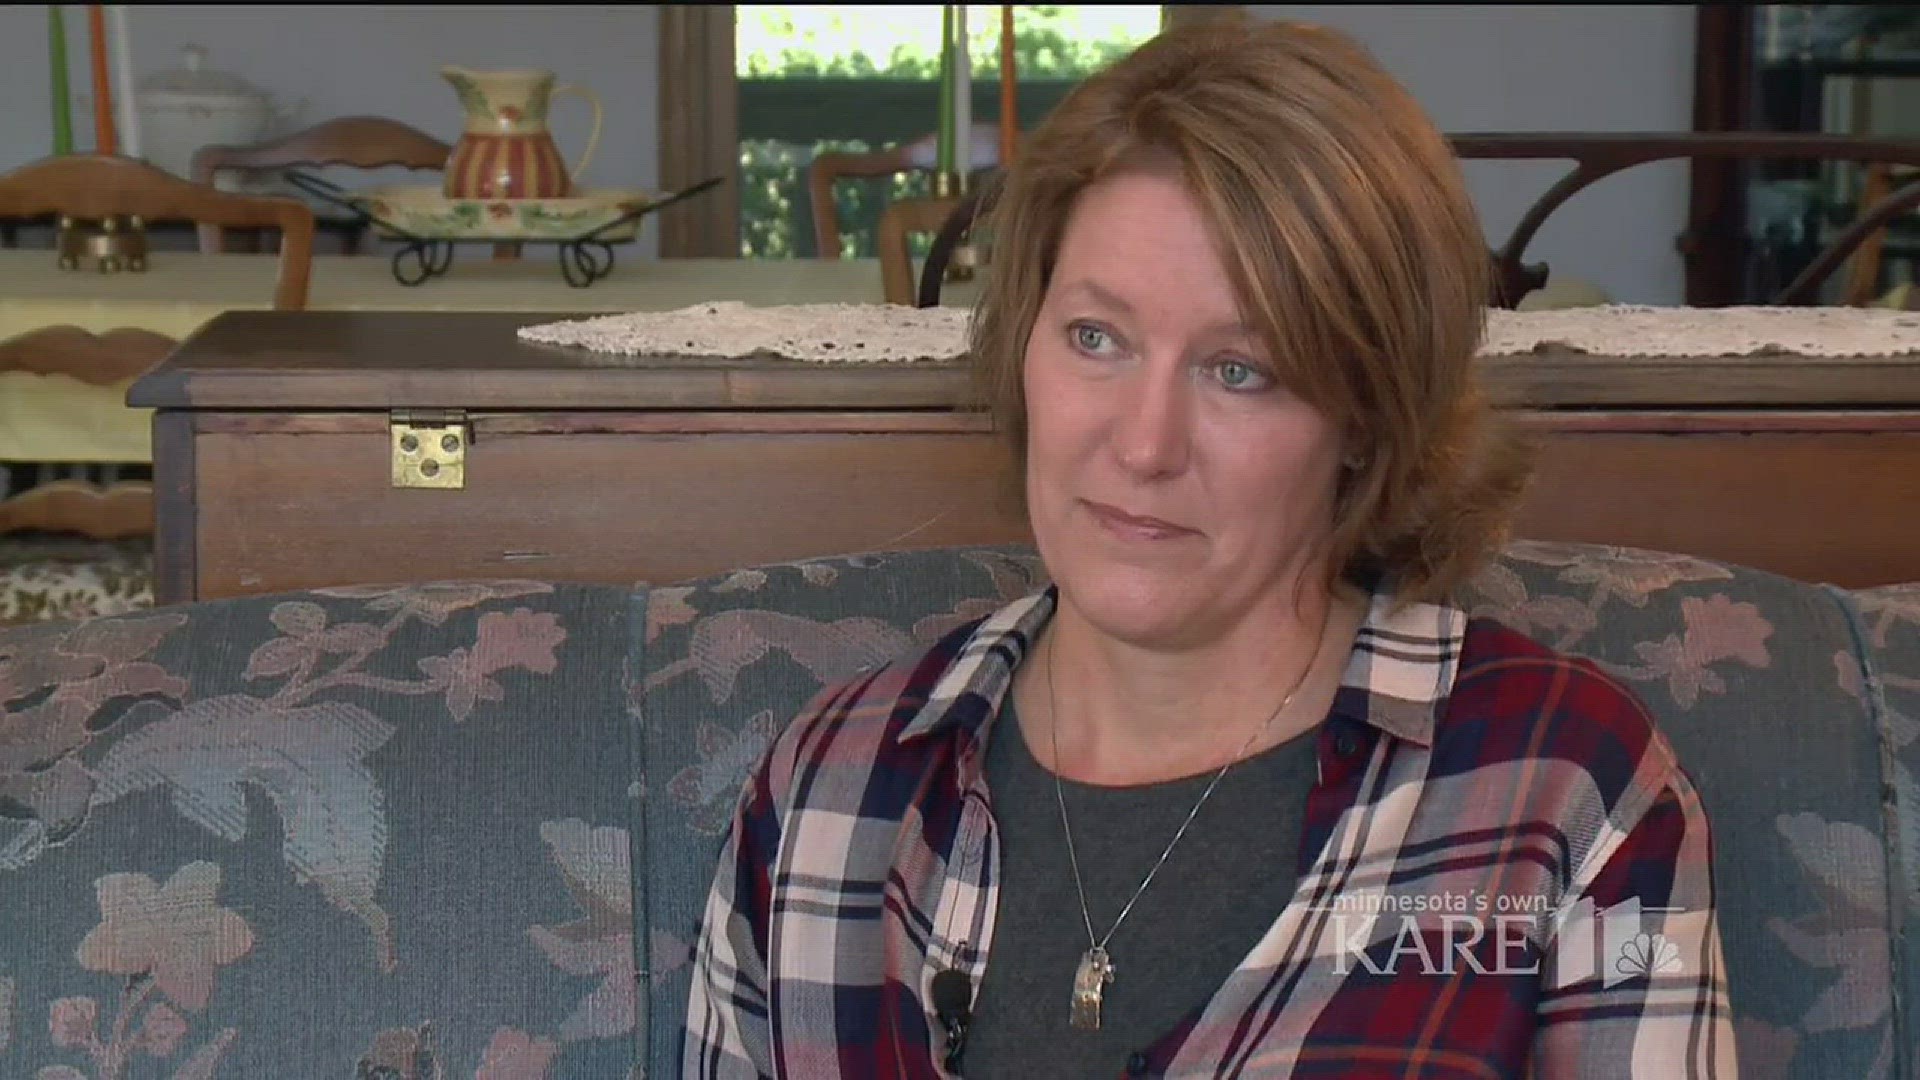 MN blogger reflects on Jacob Wetterling case